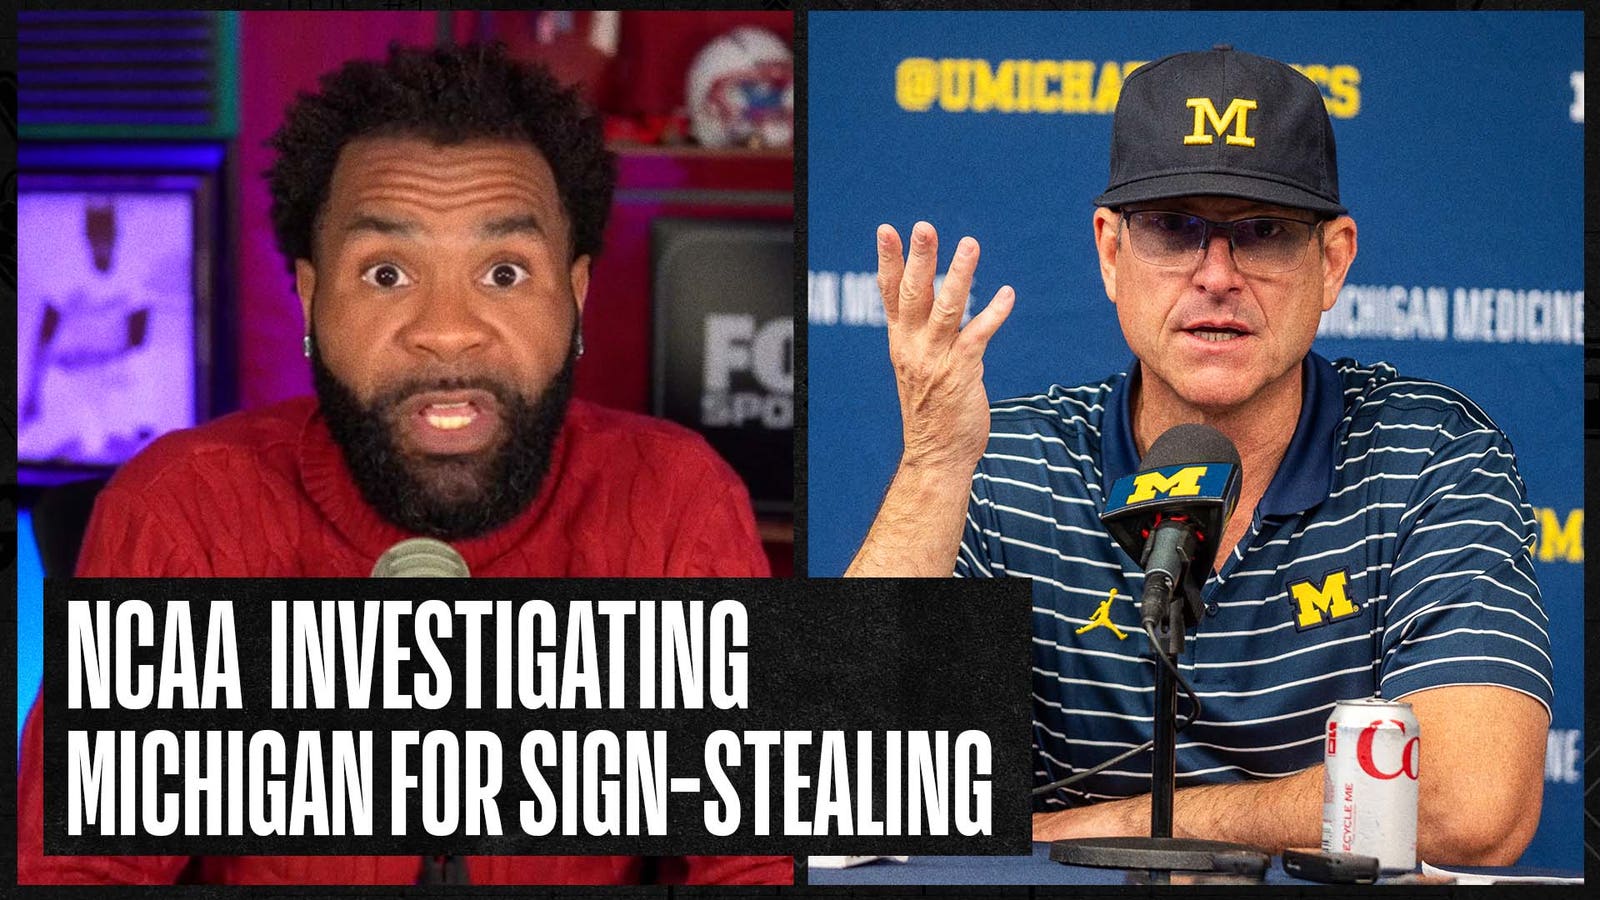 Michigan under investigation for sign-stealing